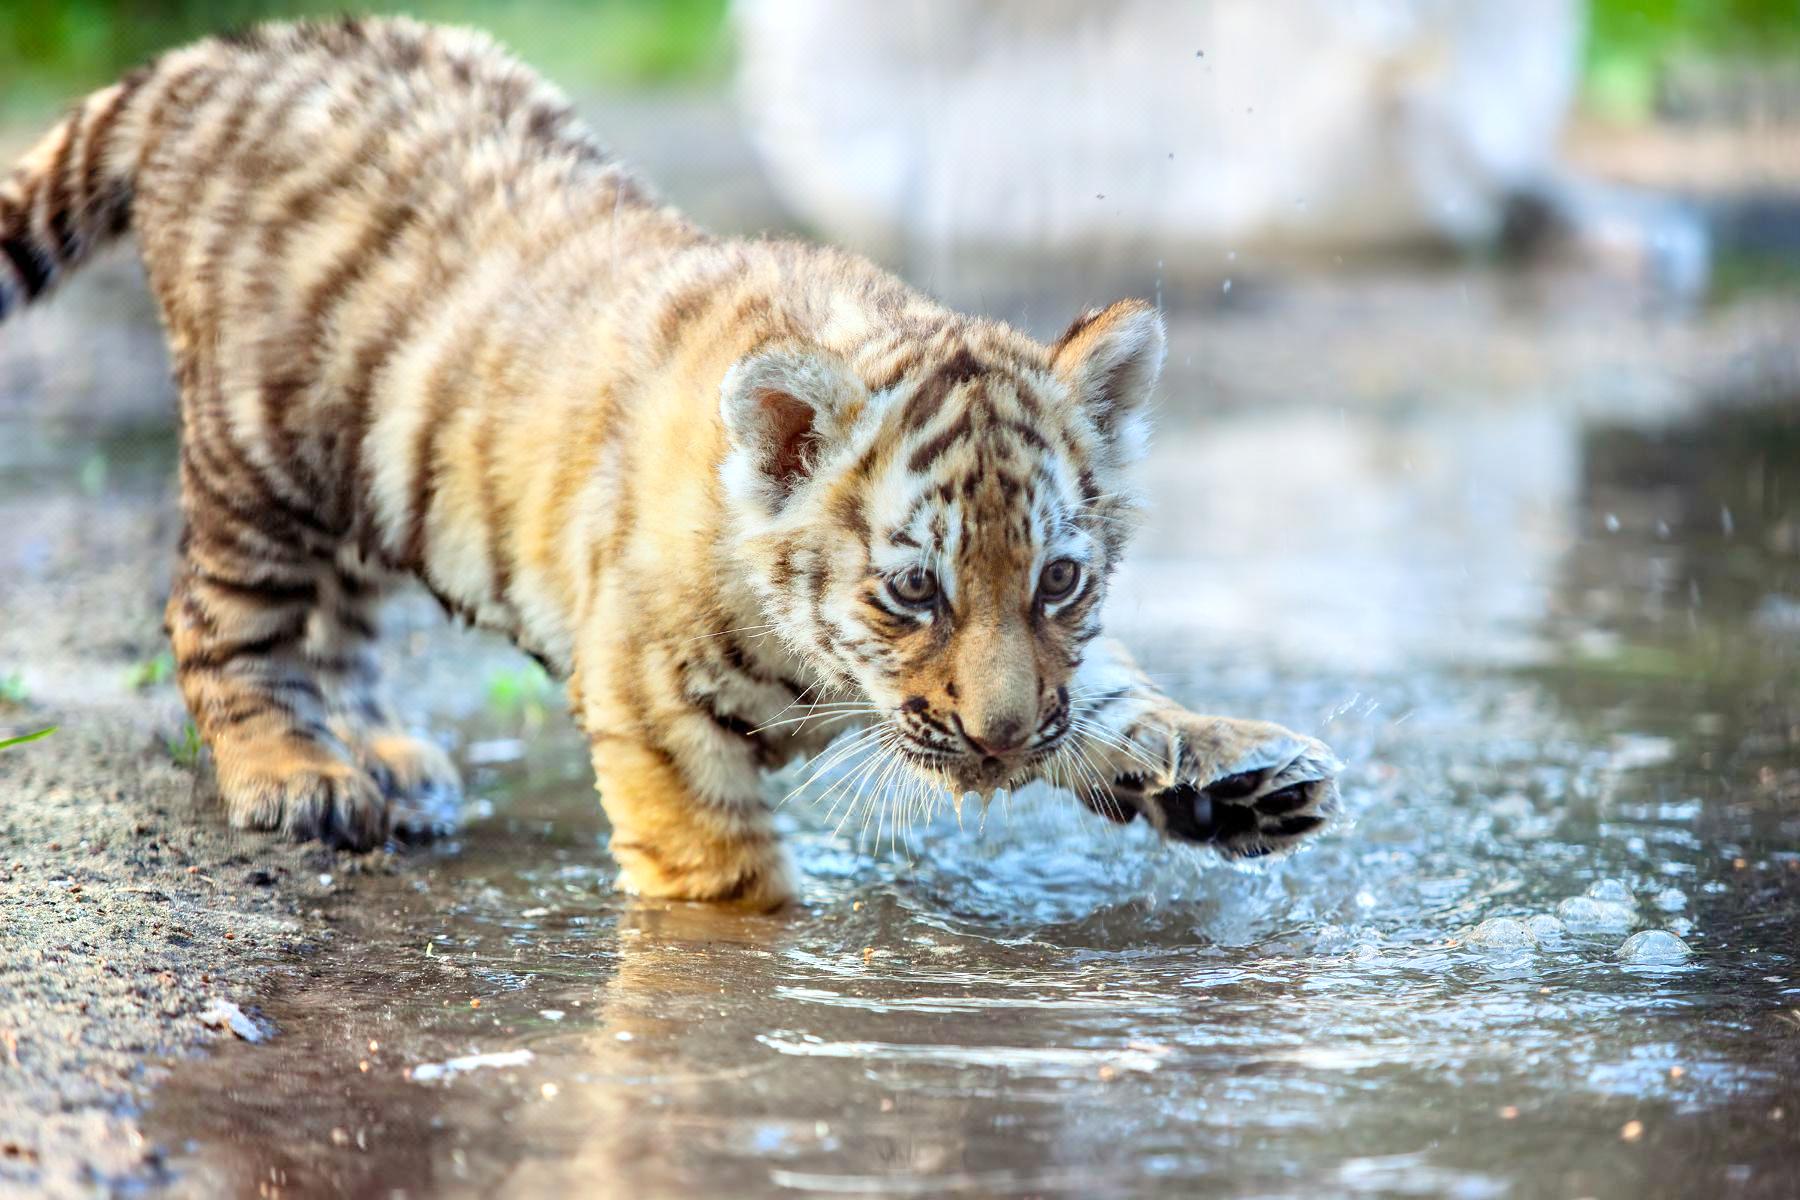 baby tigers playing in water